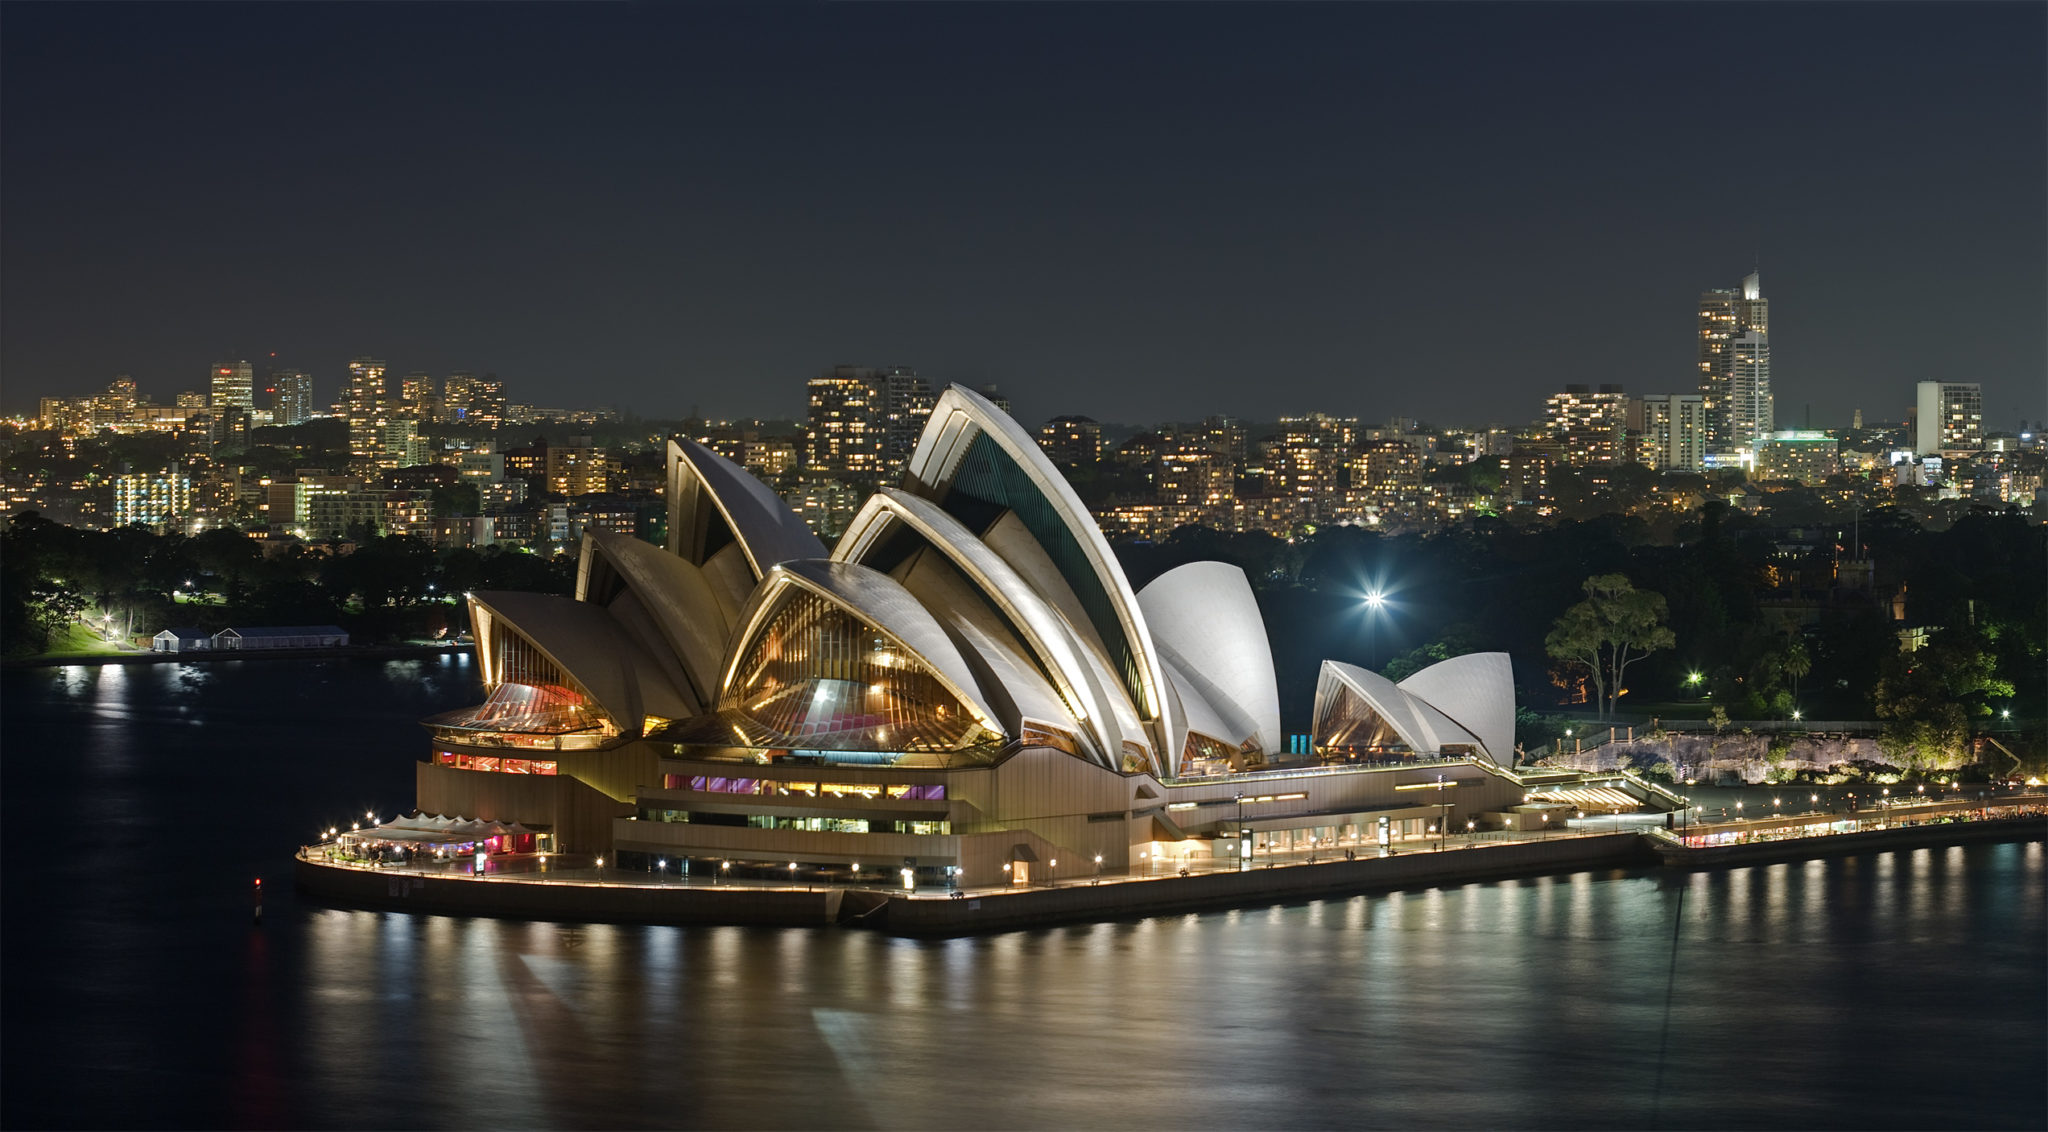 Well-recognised Sydney's Opera House, where the concert will take place